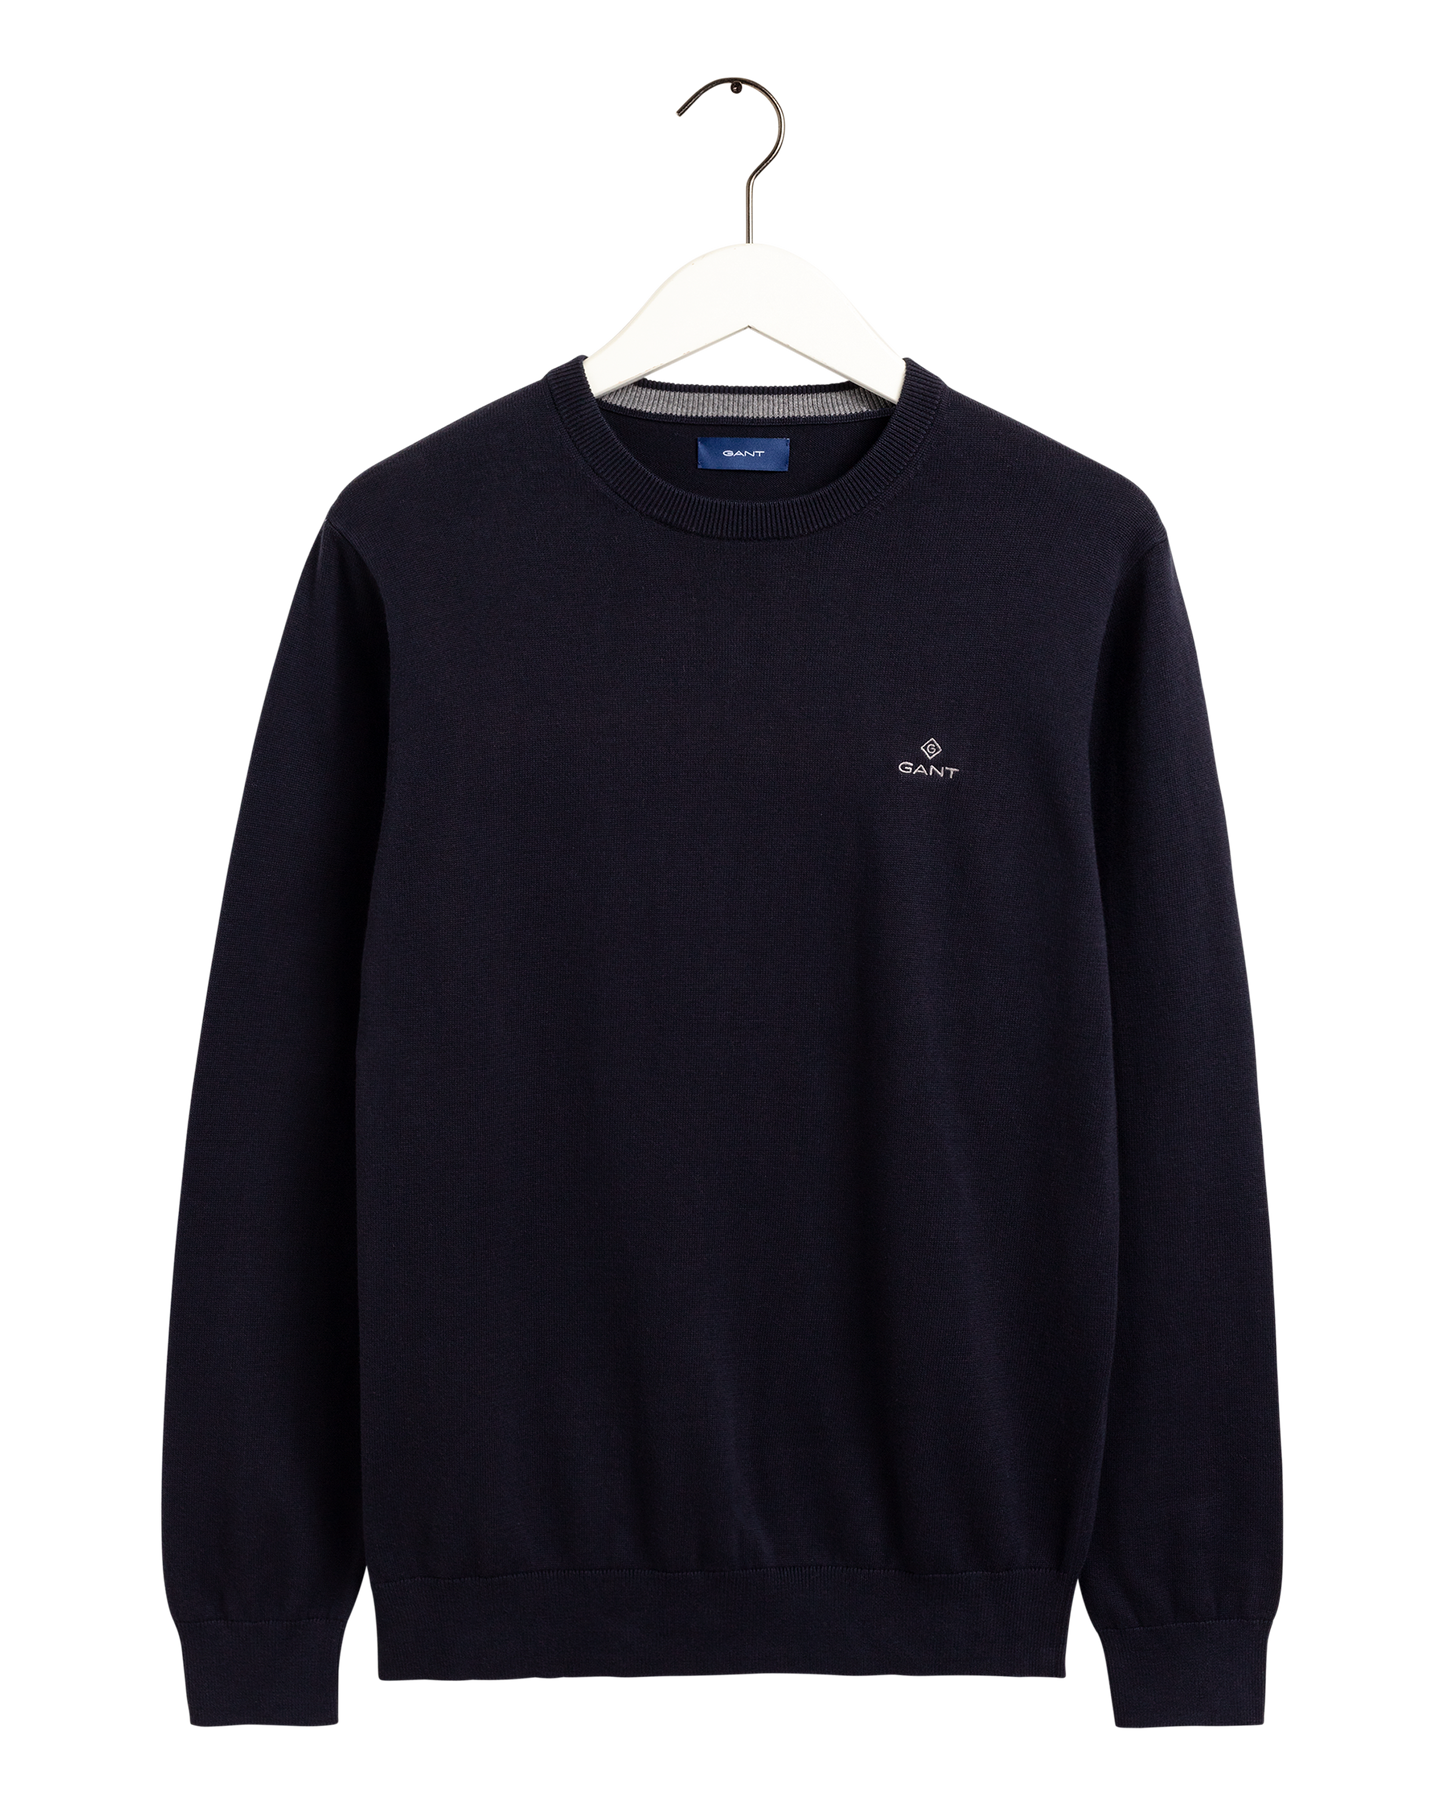 Gant Knitwear in regular classic fit. Cotton Crew    , chosen in a Navy colour